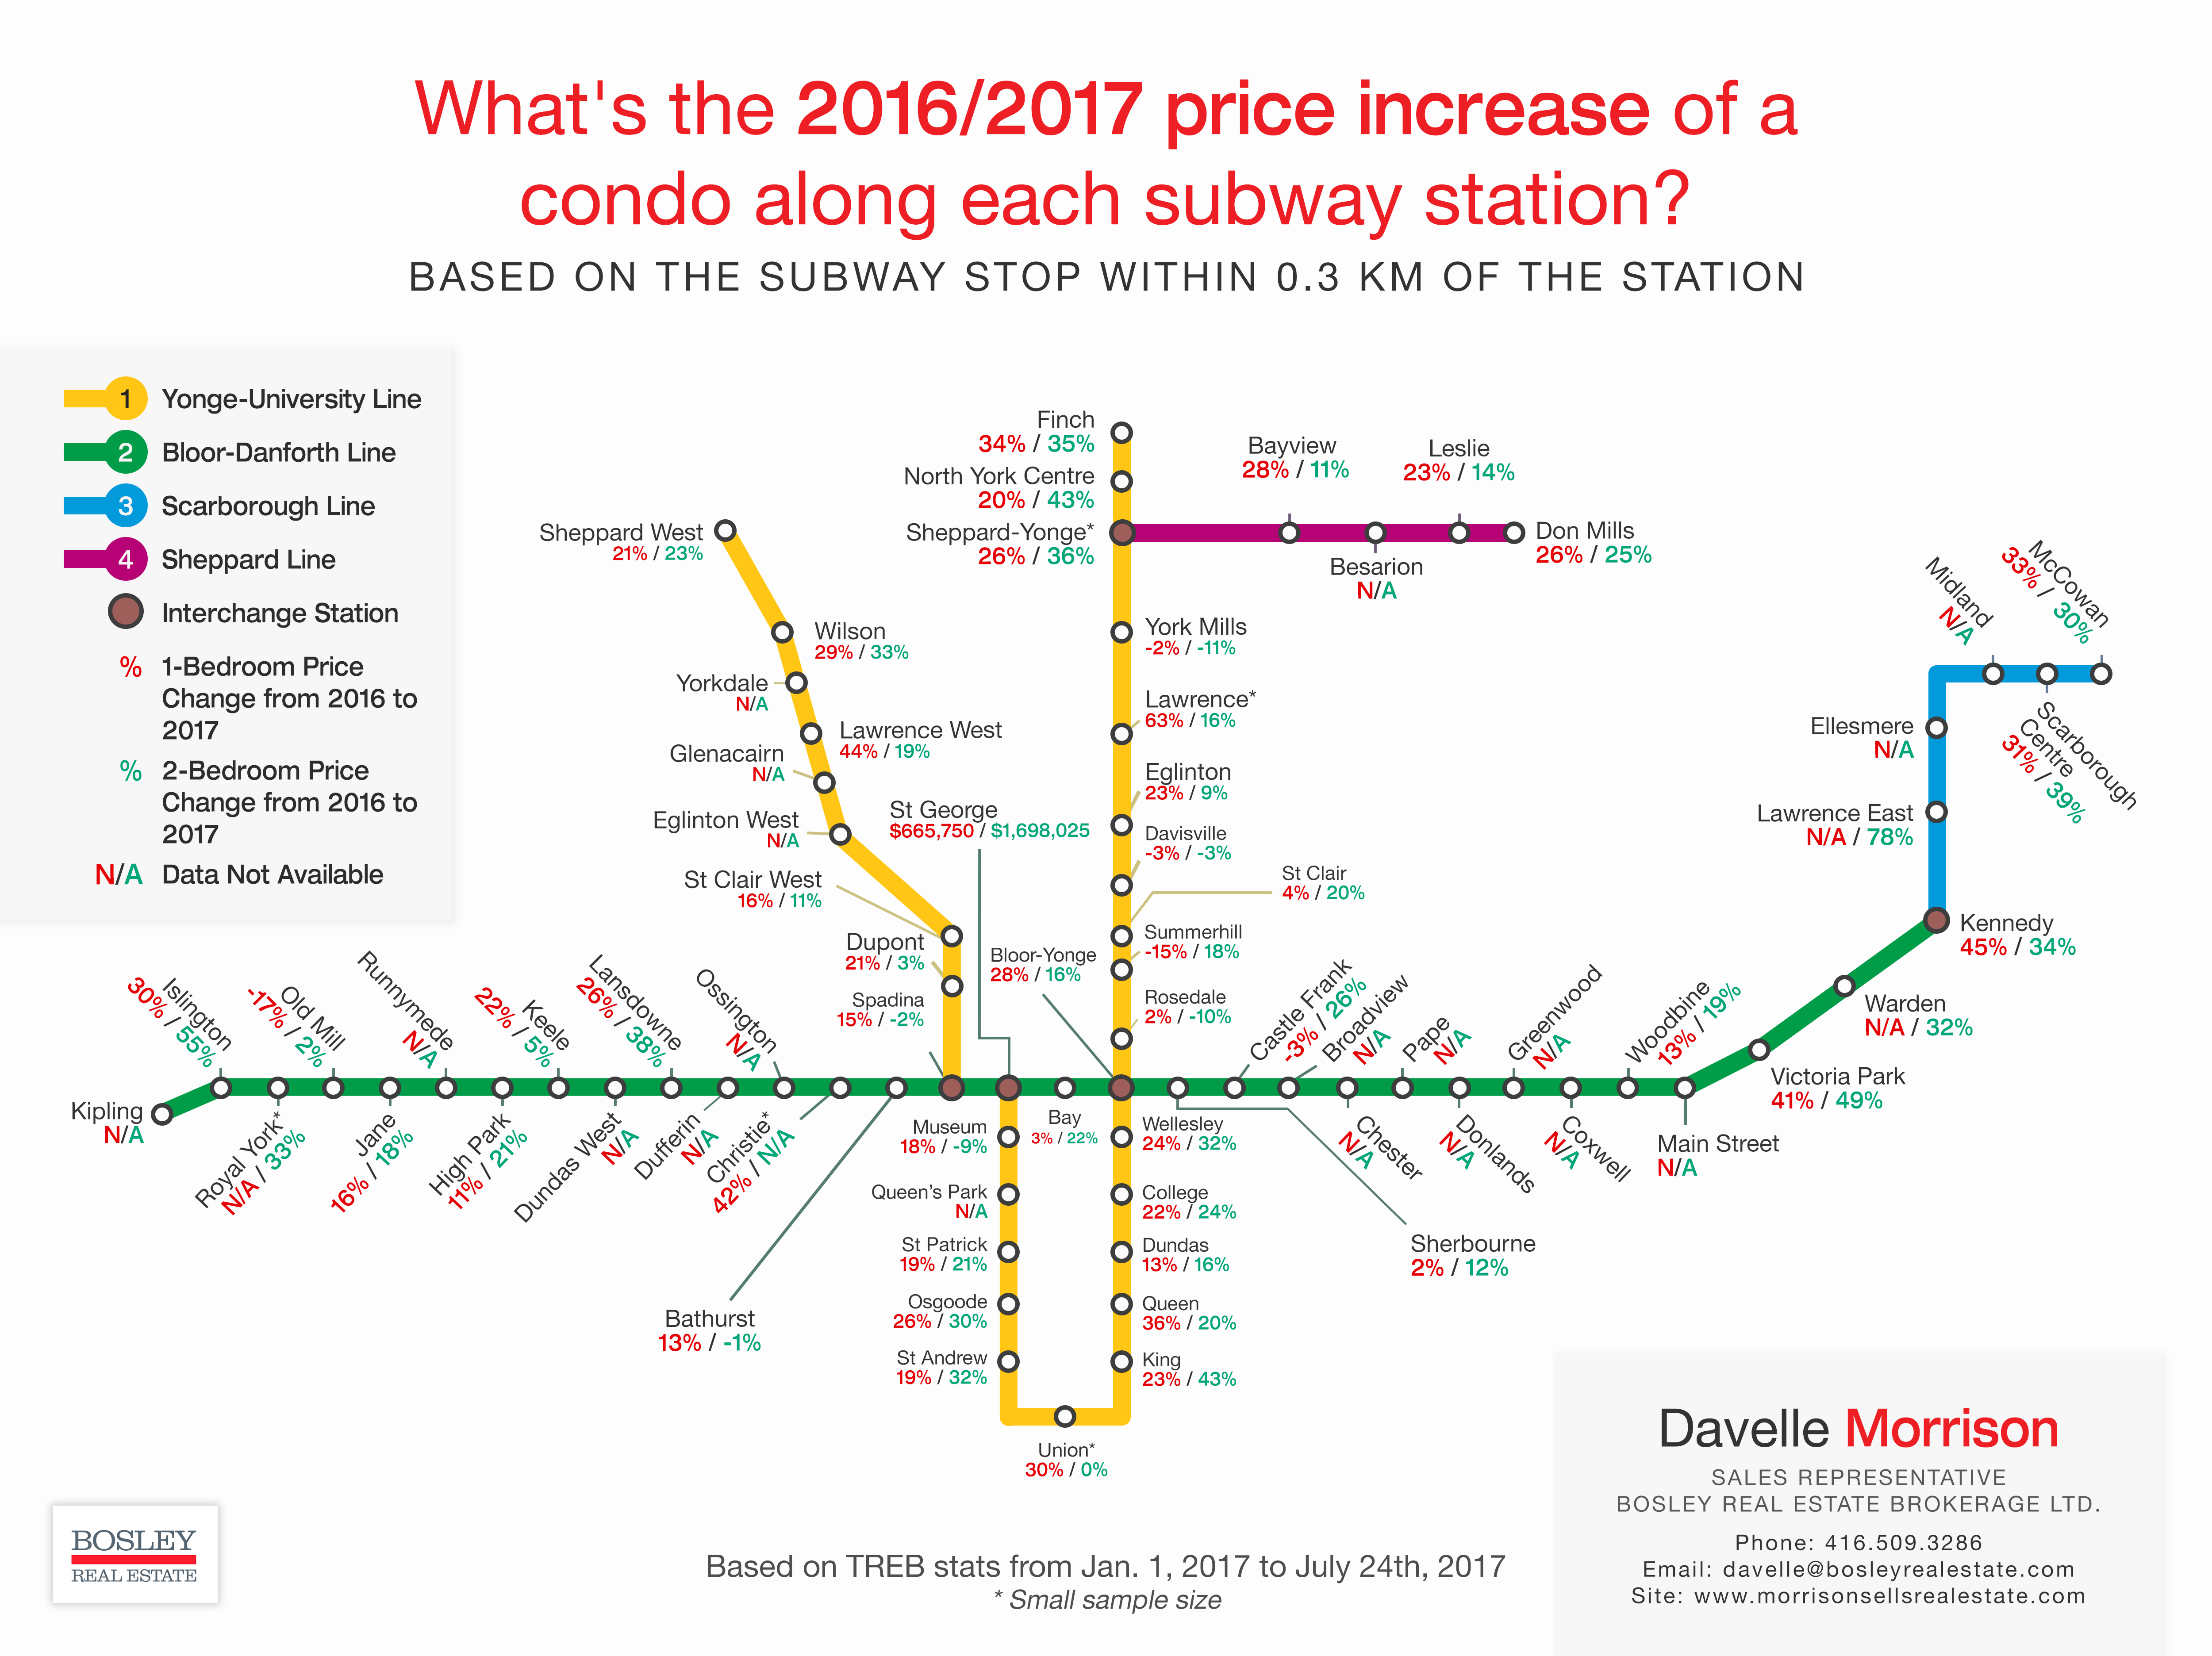 Price Increase of Condos Along TTC Stations